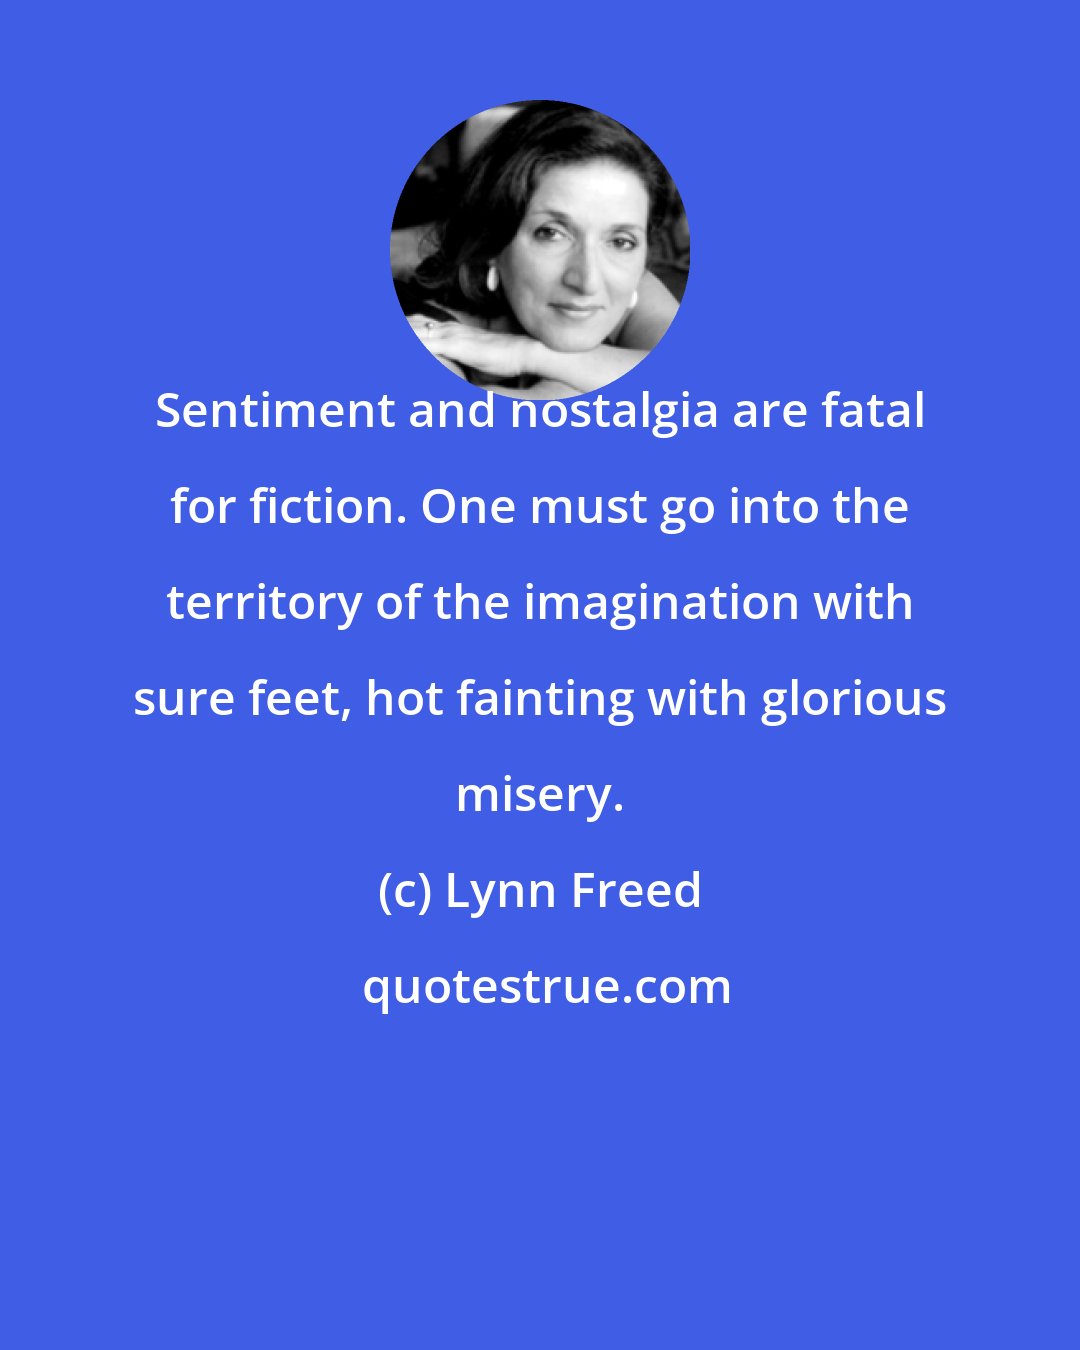 Lynn Freed: Sentiment and nostalgia are fatal for fiction. One must go into the territory of the imagination with sure feet, hot fainting with glorious misery.